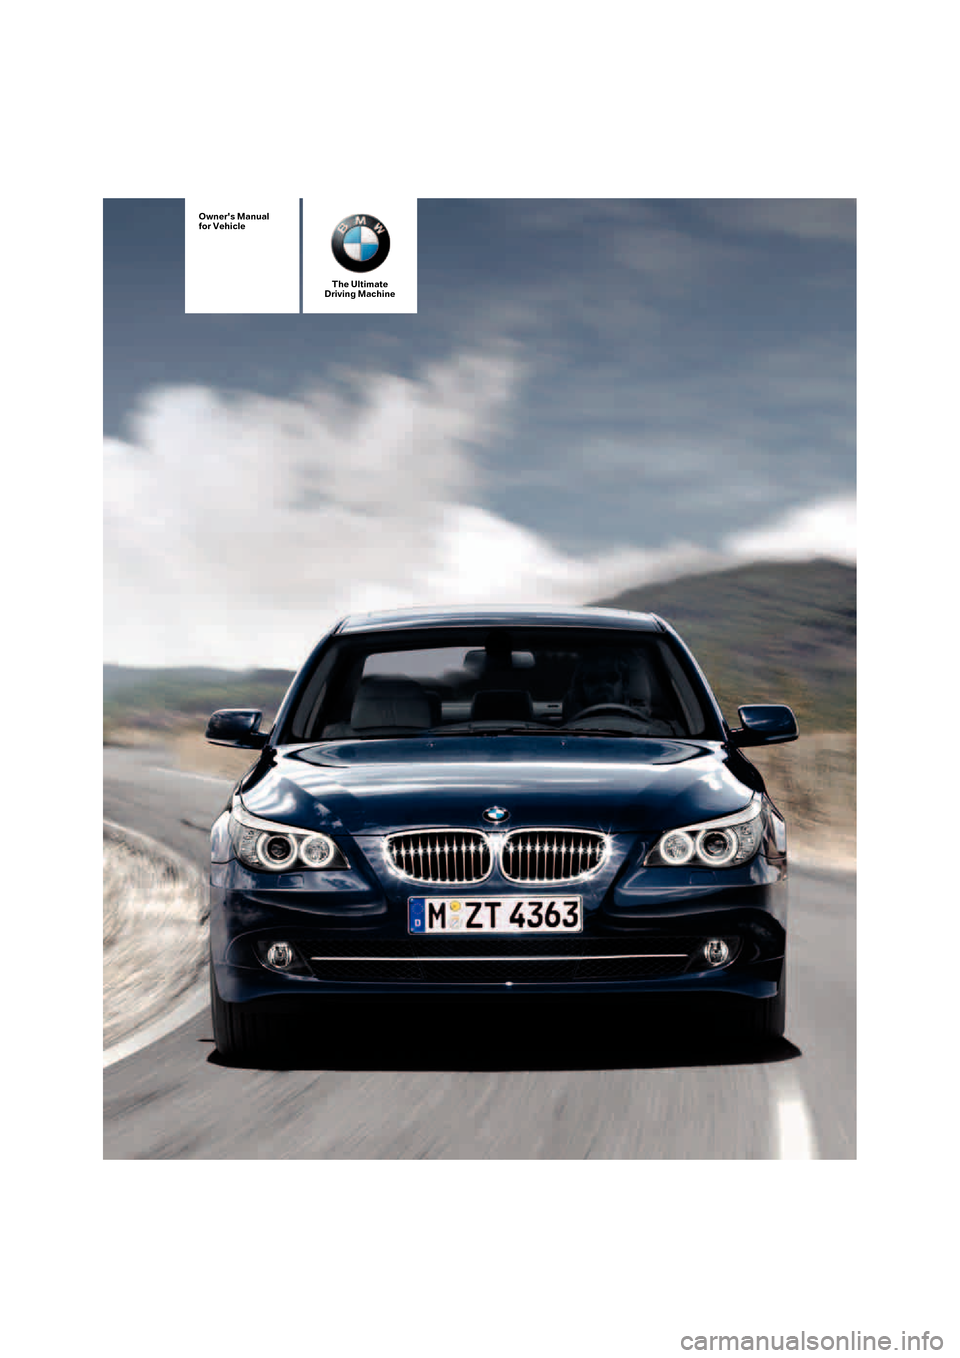 BMW 528XI SEDAN 2008 E60 Owners Manual The Ultimate
Driving Machine
Owners Manual
for Vehicle 